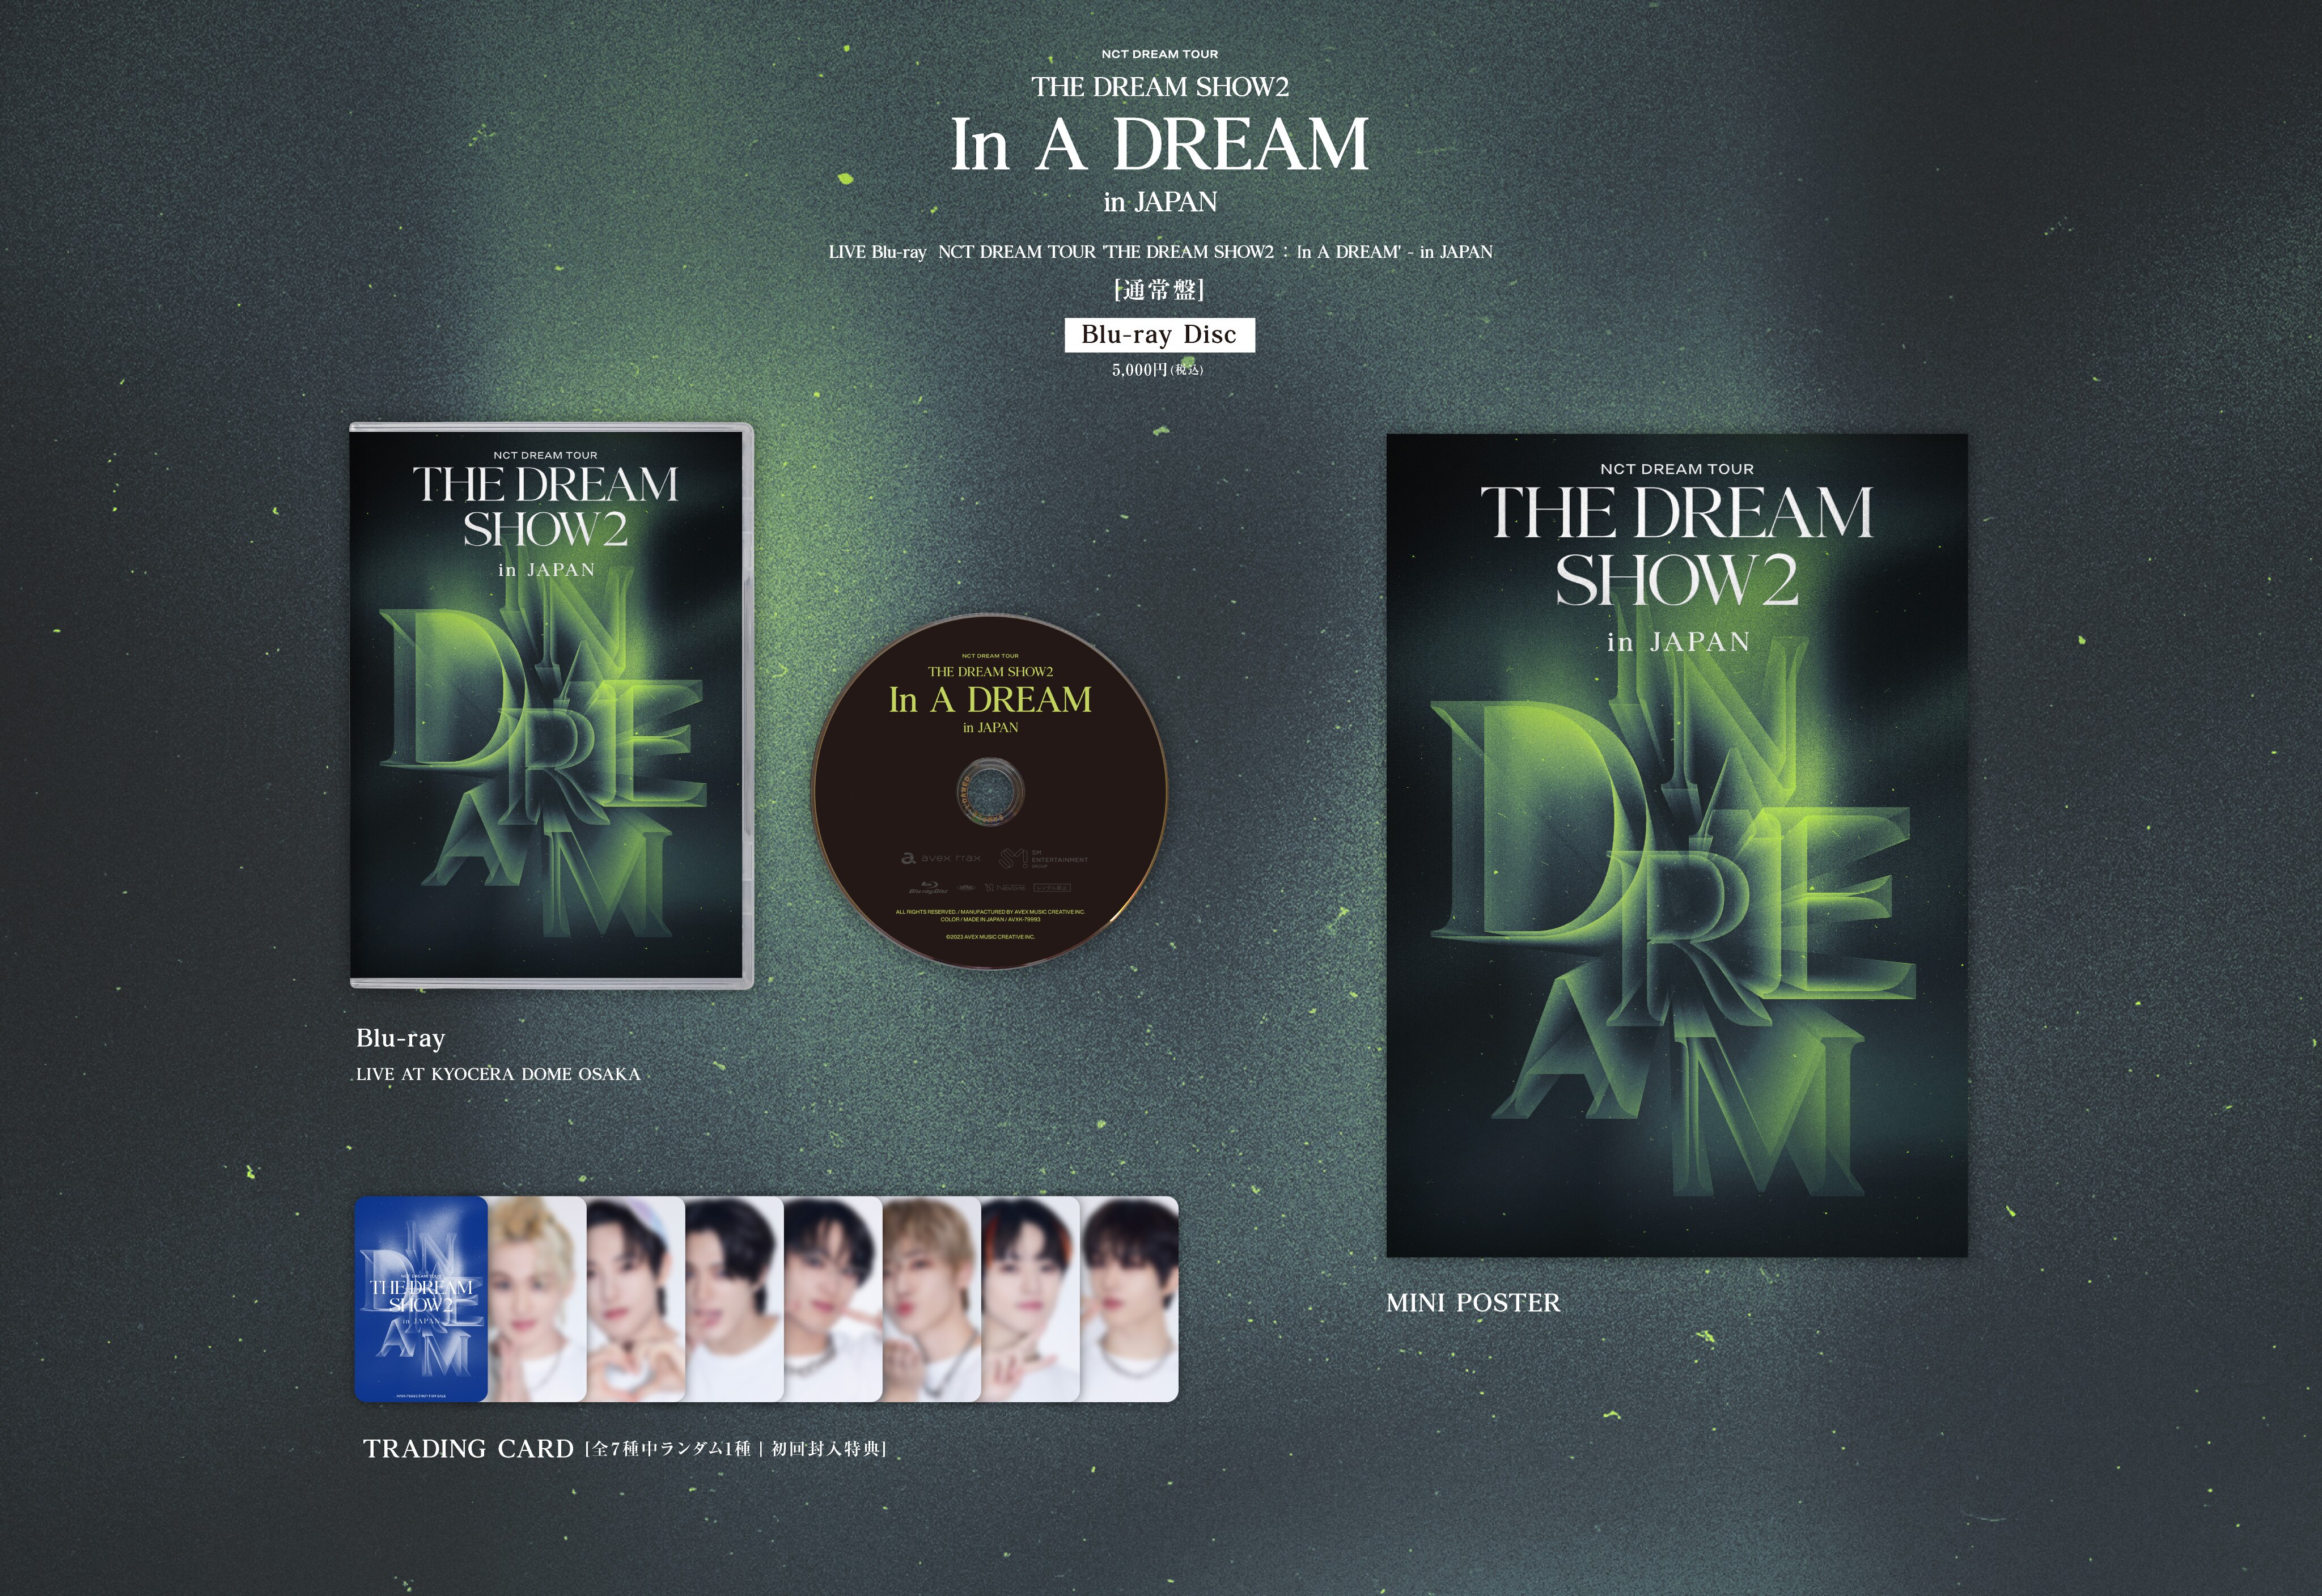 NCT THE DREAM SHOW2 in JAPAN 初回限定Blu-ray